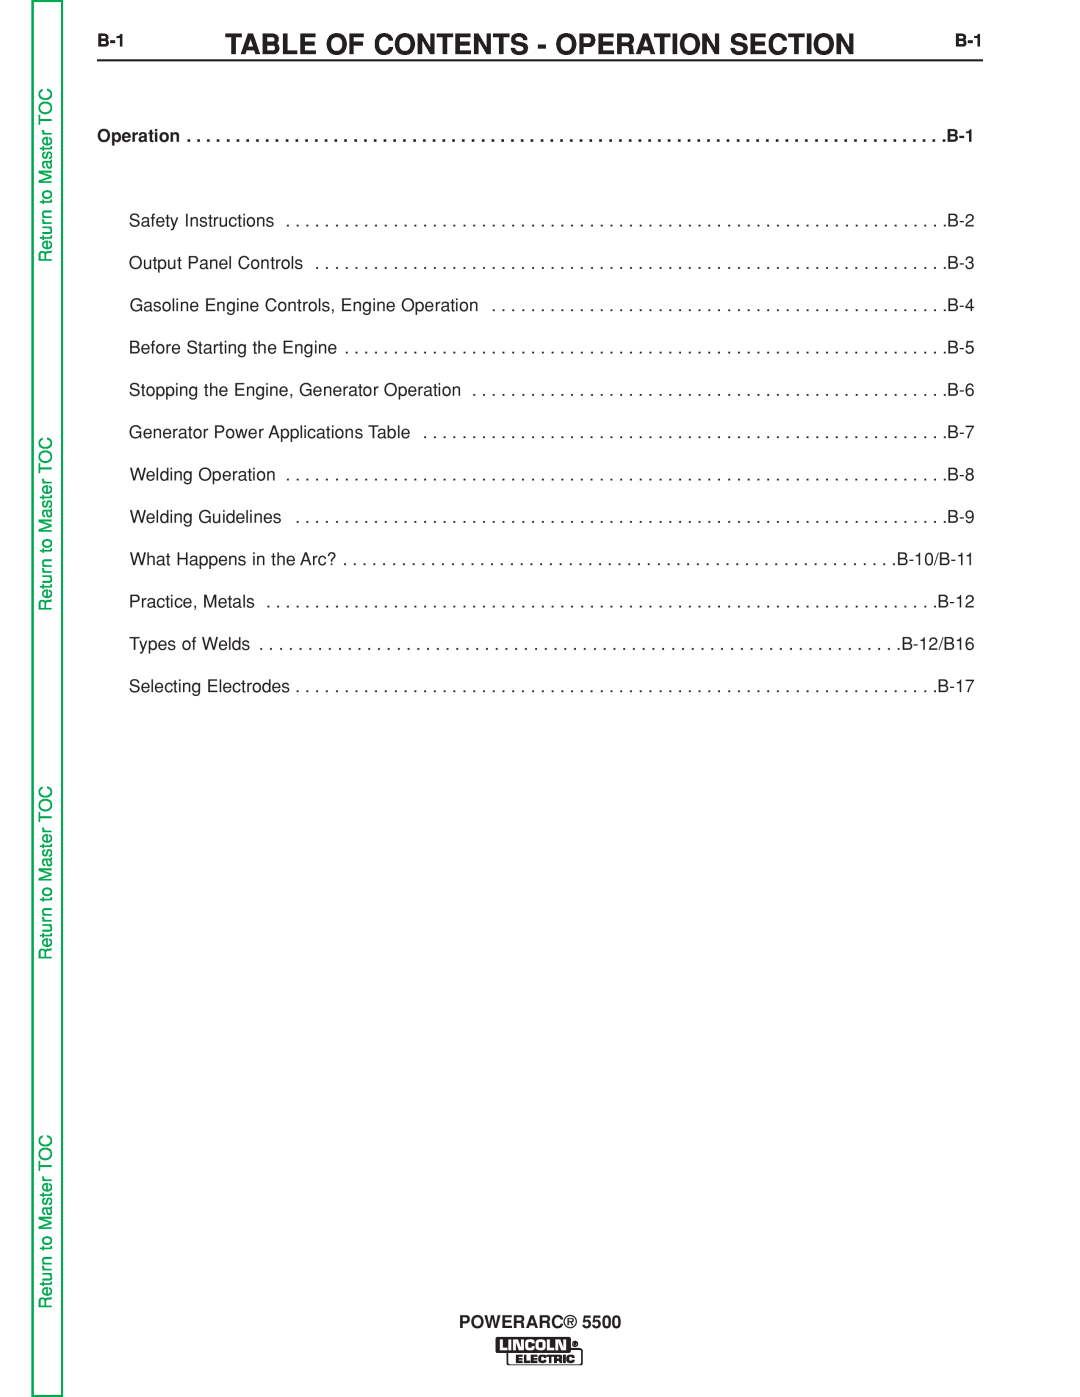 Lincoln Electric SVM197-A service manual Table Of Contents - Operation Section, Return to Master TOC, Powerarc 